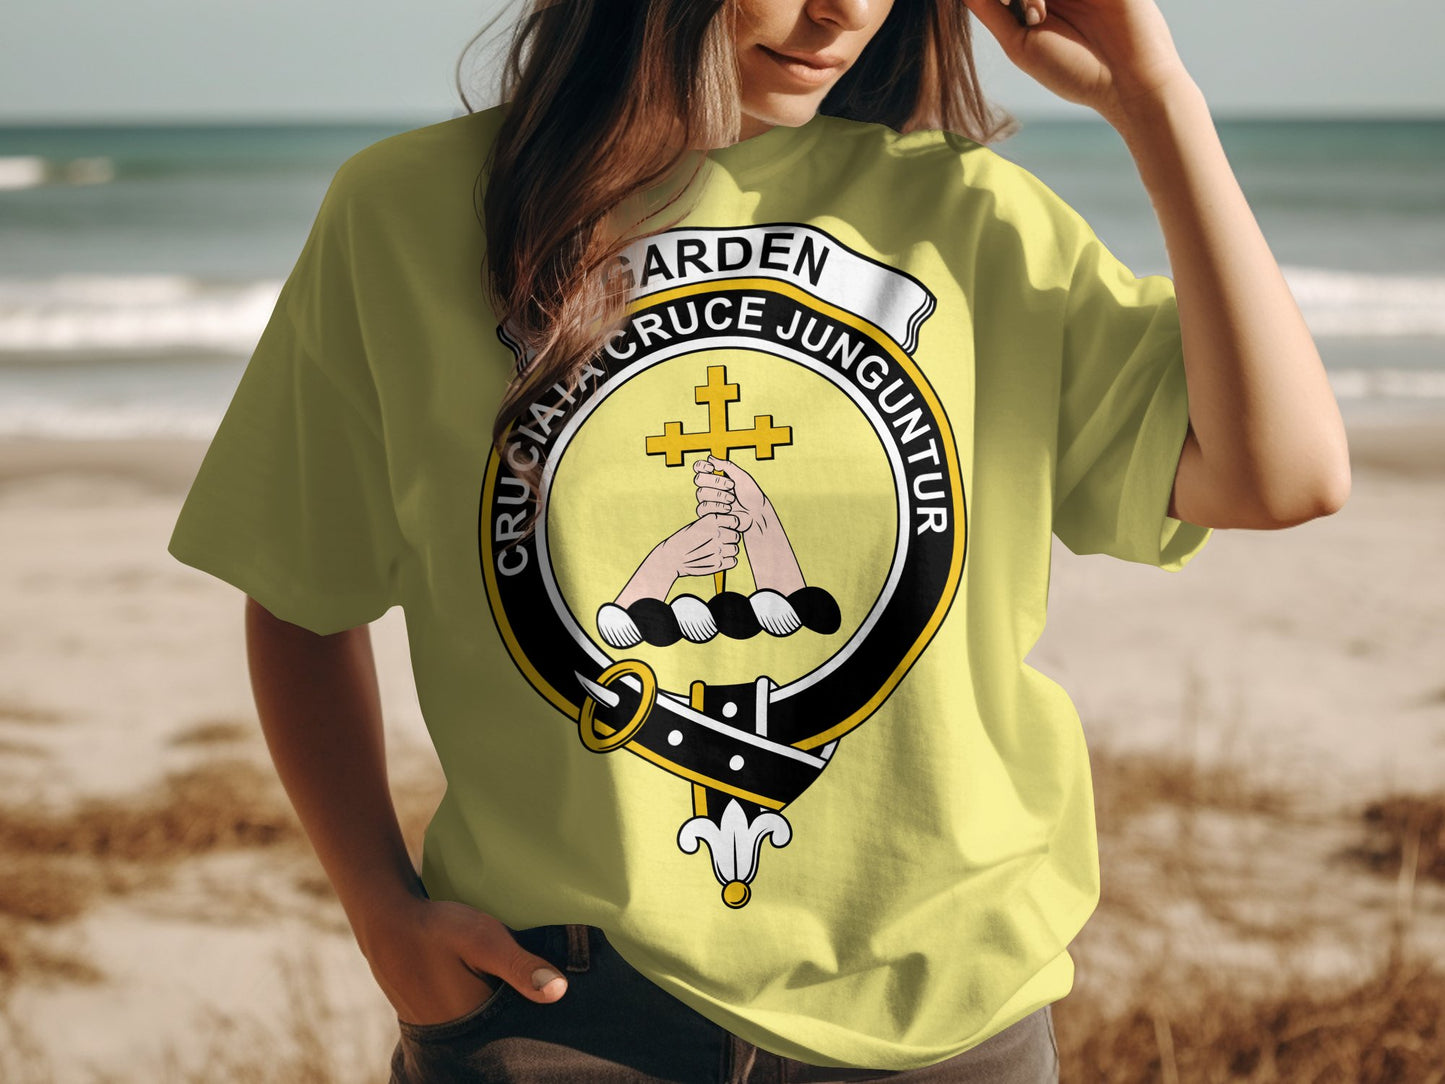 Garden Scottish Clan Crest T-Shirt Perfect for Highland Games - Living Stone Gifts